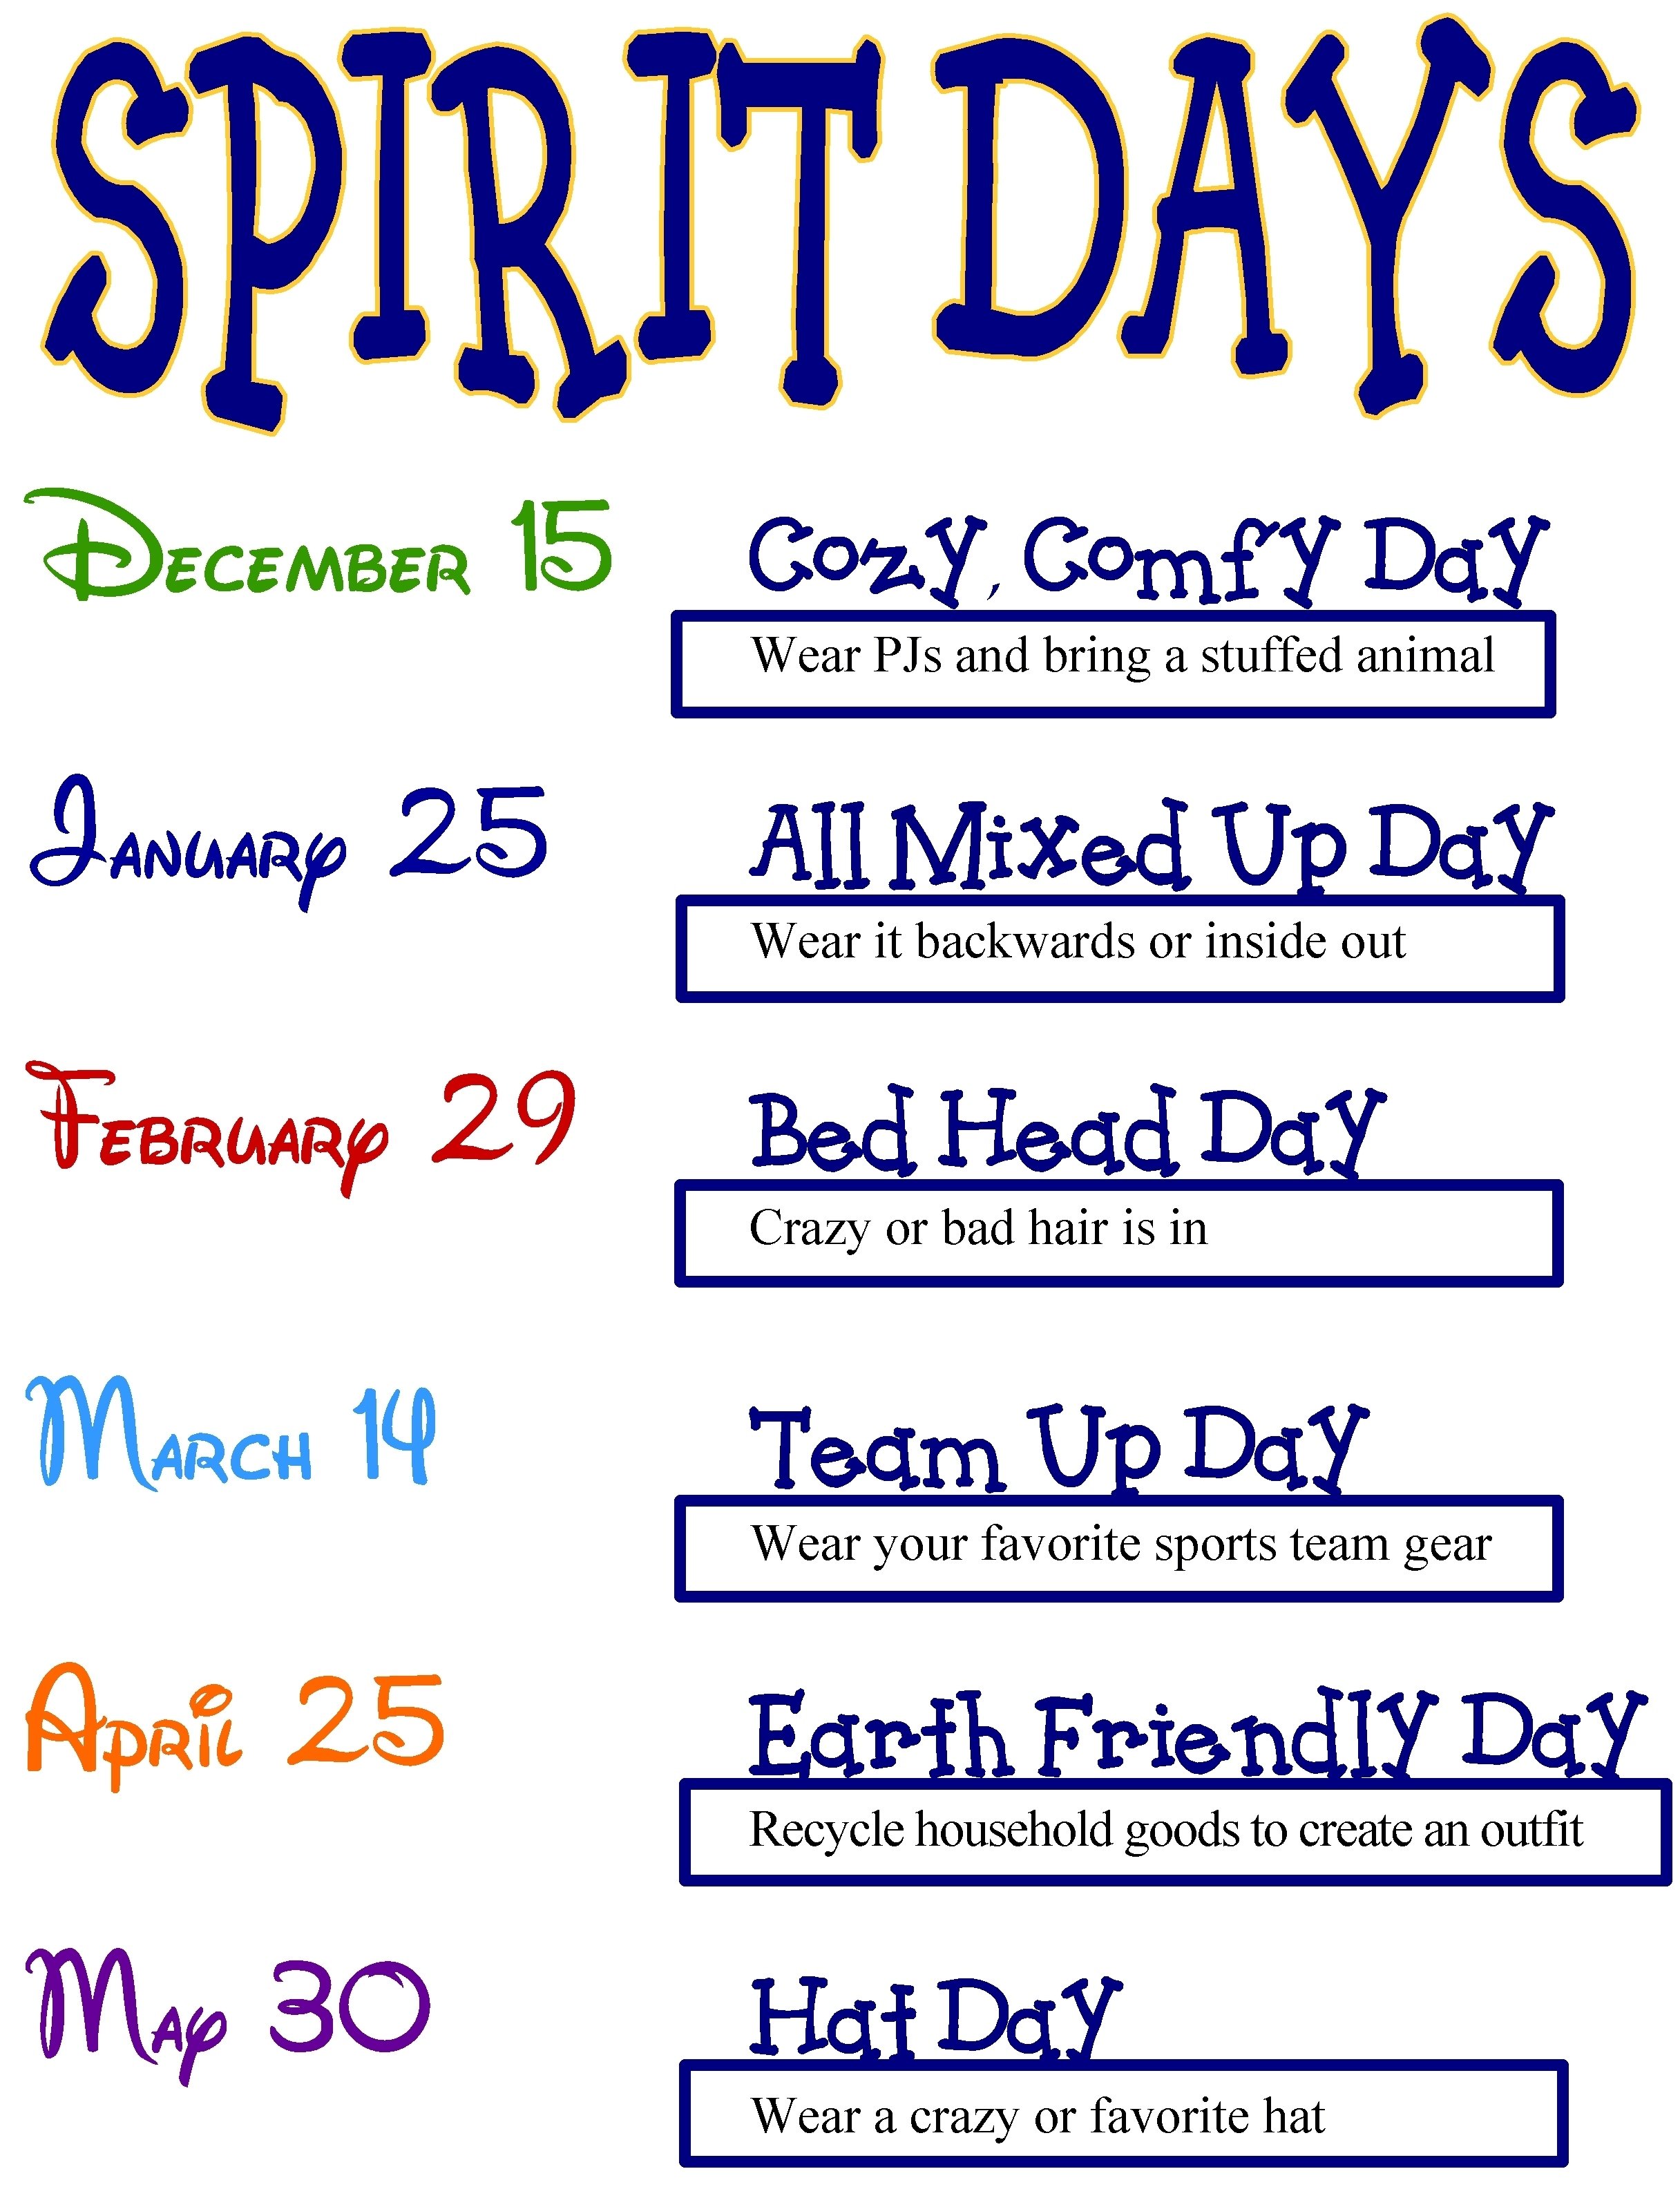 10 Ideal Spirit Day Ideas For High School index of sve wp content uploads 2011 12 4 2022